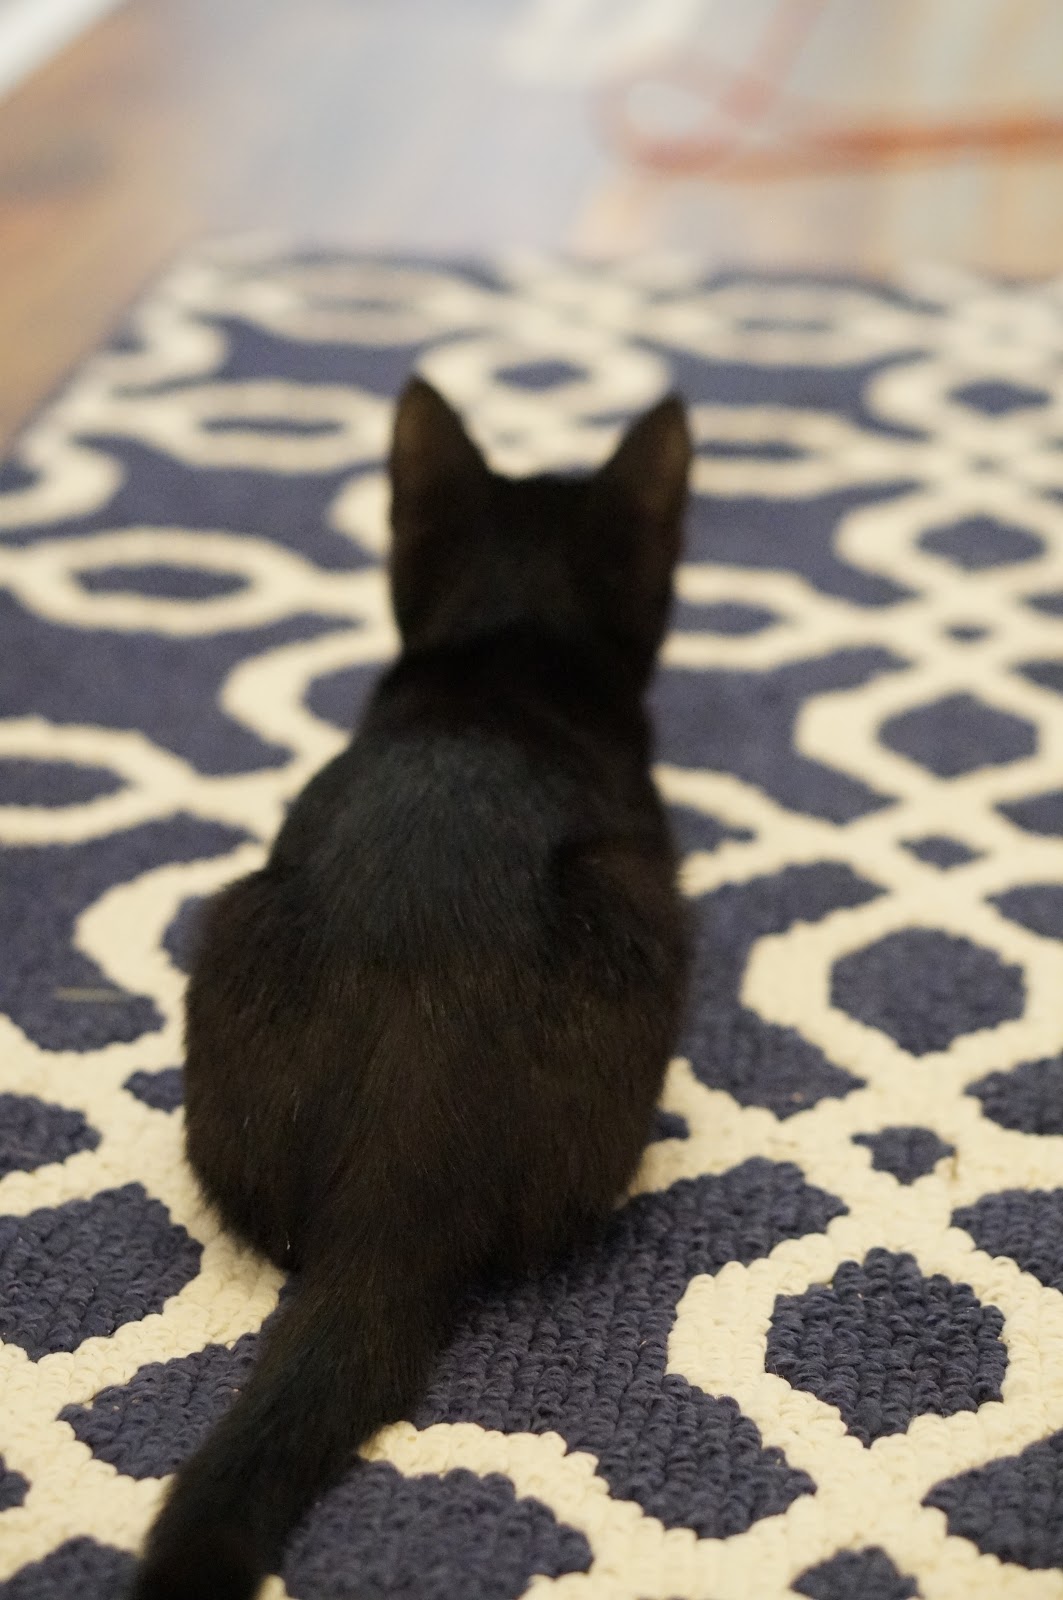 ADOPTING A KITTEN | SCIENCE DIET® by North Carolina lifestyle blogger Rebecca Lately